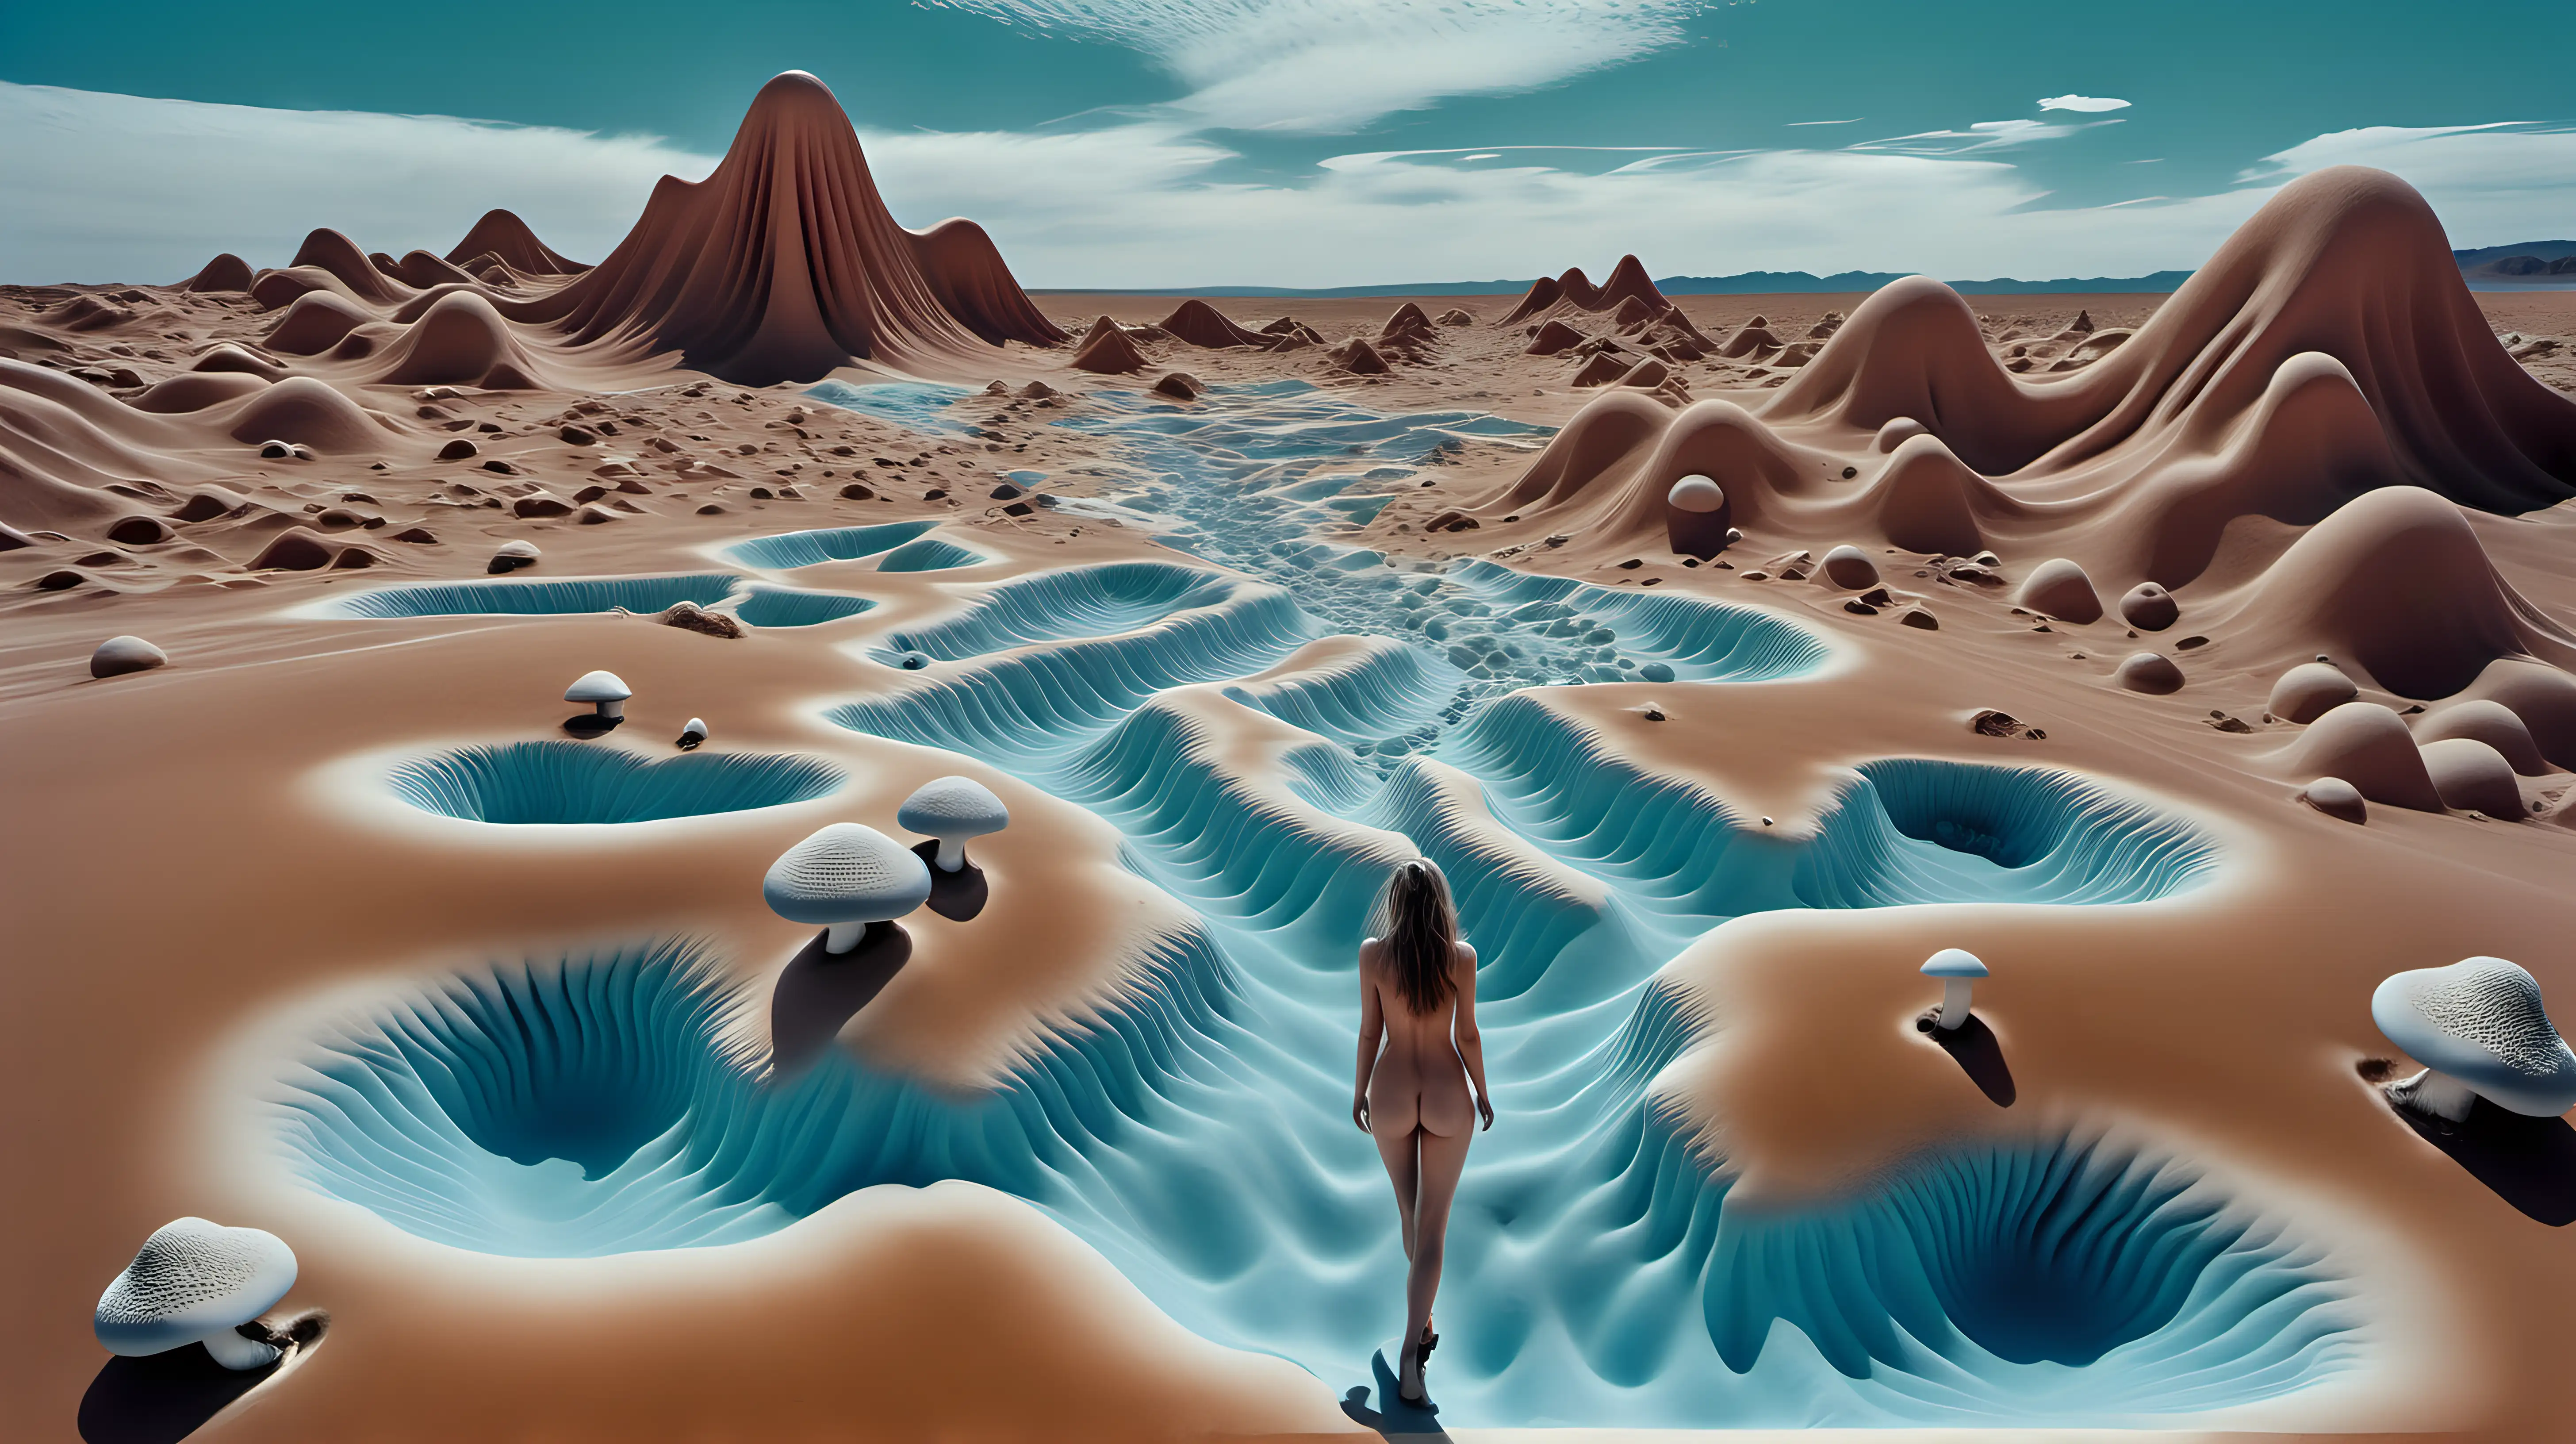 Surreal Nude Woman Amidst Crystal Blue Mineral Clouds and Desert Dunes